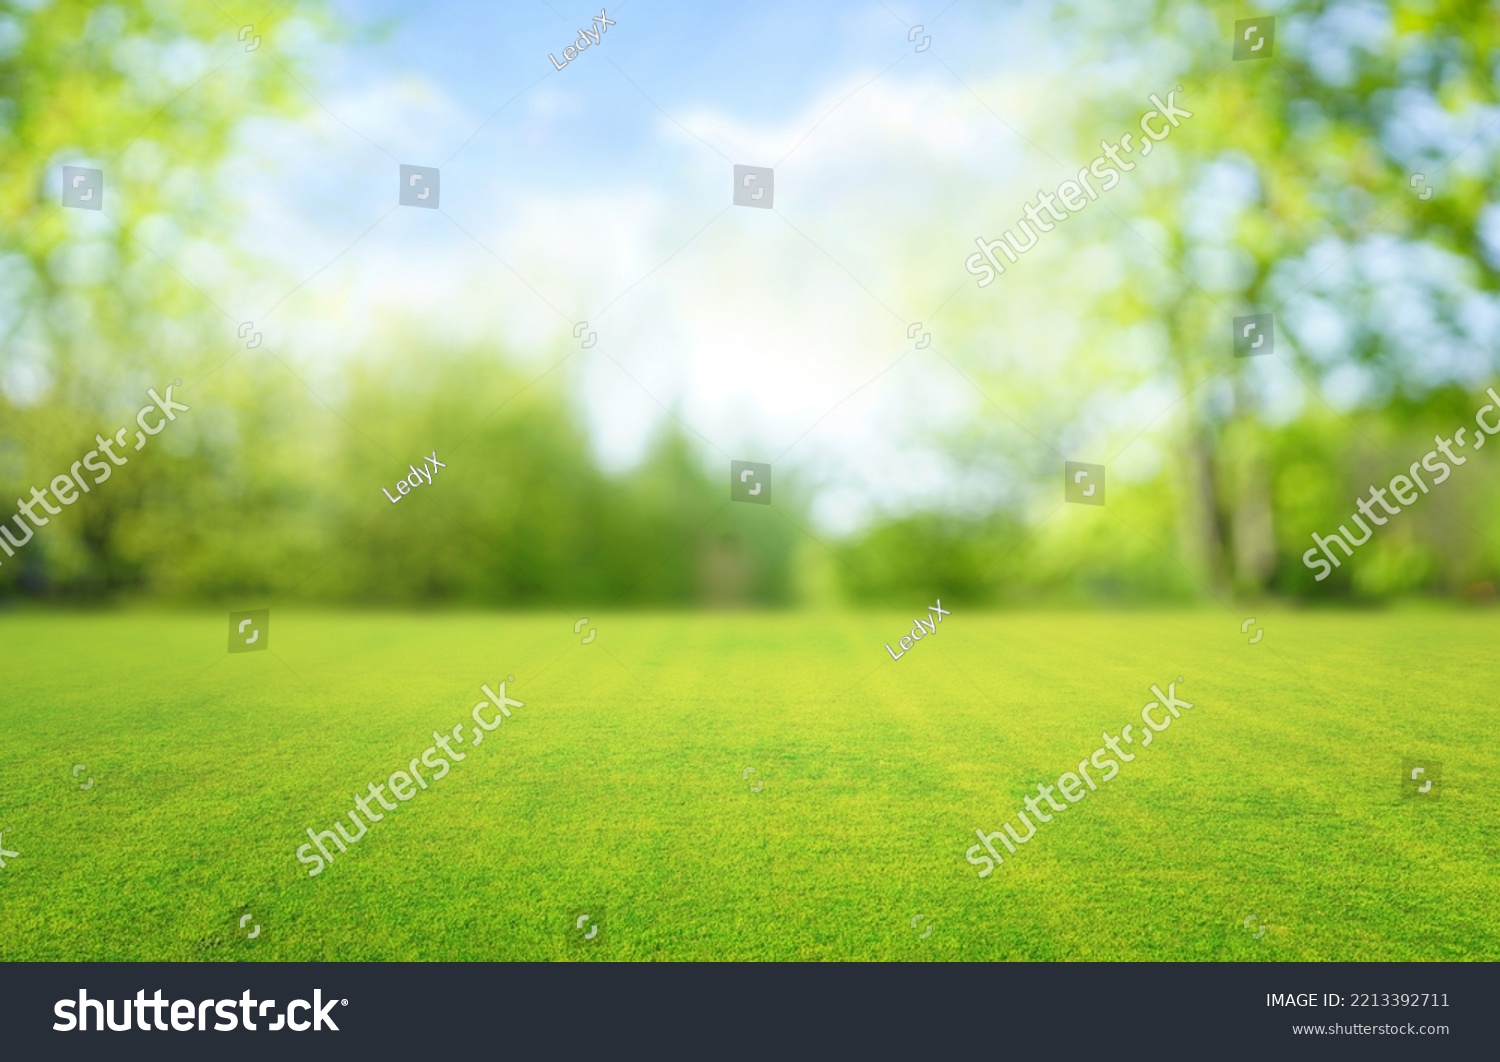 Beautiful blurred background image of spring nature with a neatly trimmed lawn surrounded by trees against a blue sky with clouds on a bright sunny day. #2213392711